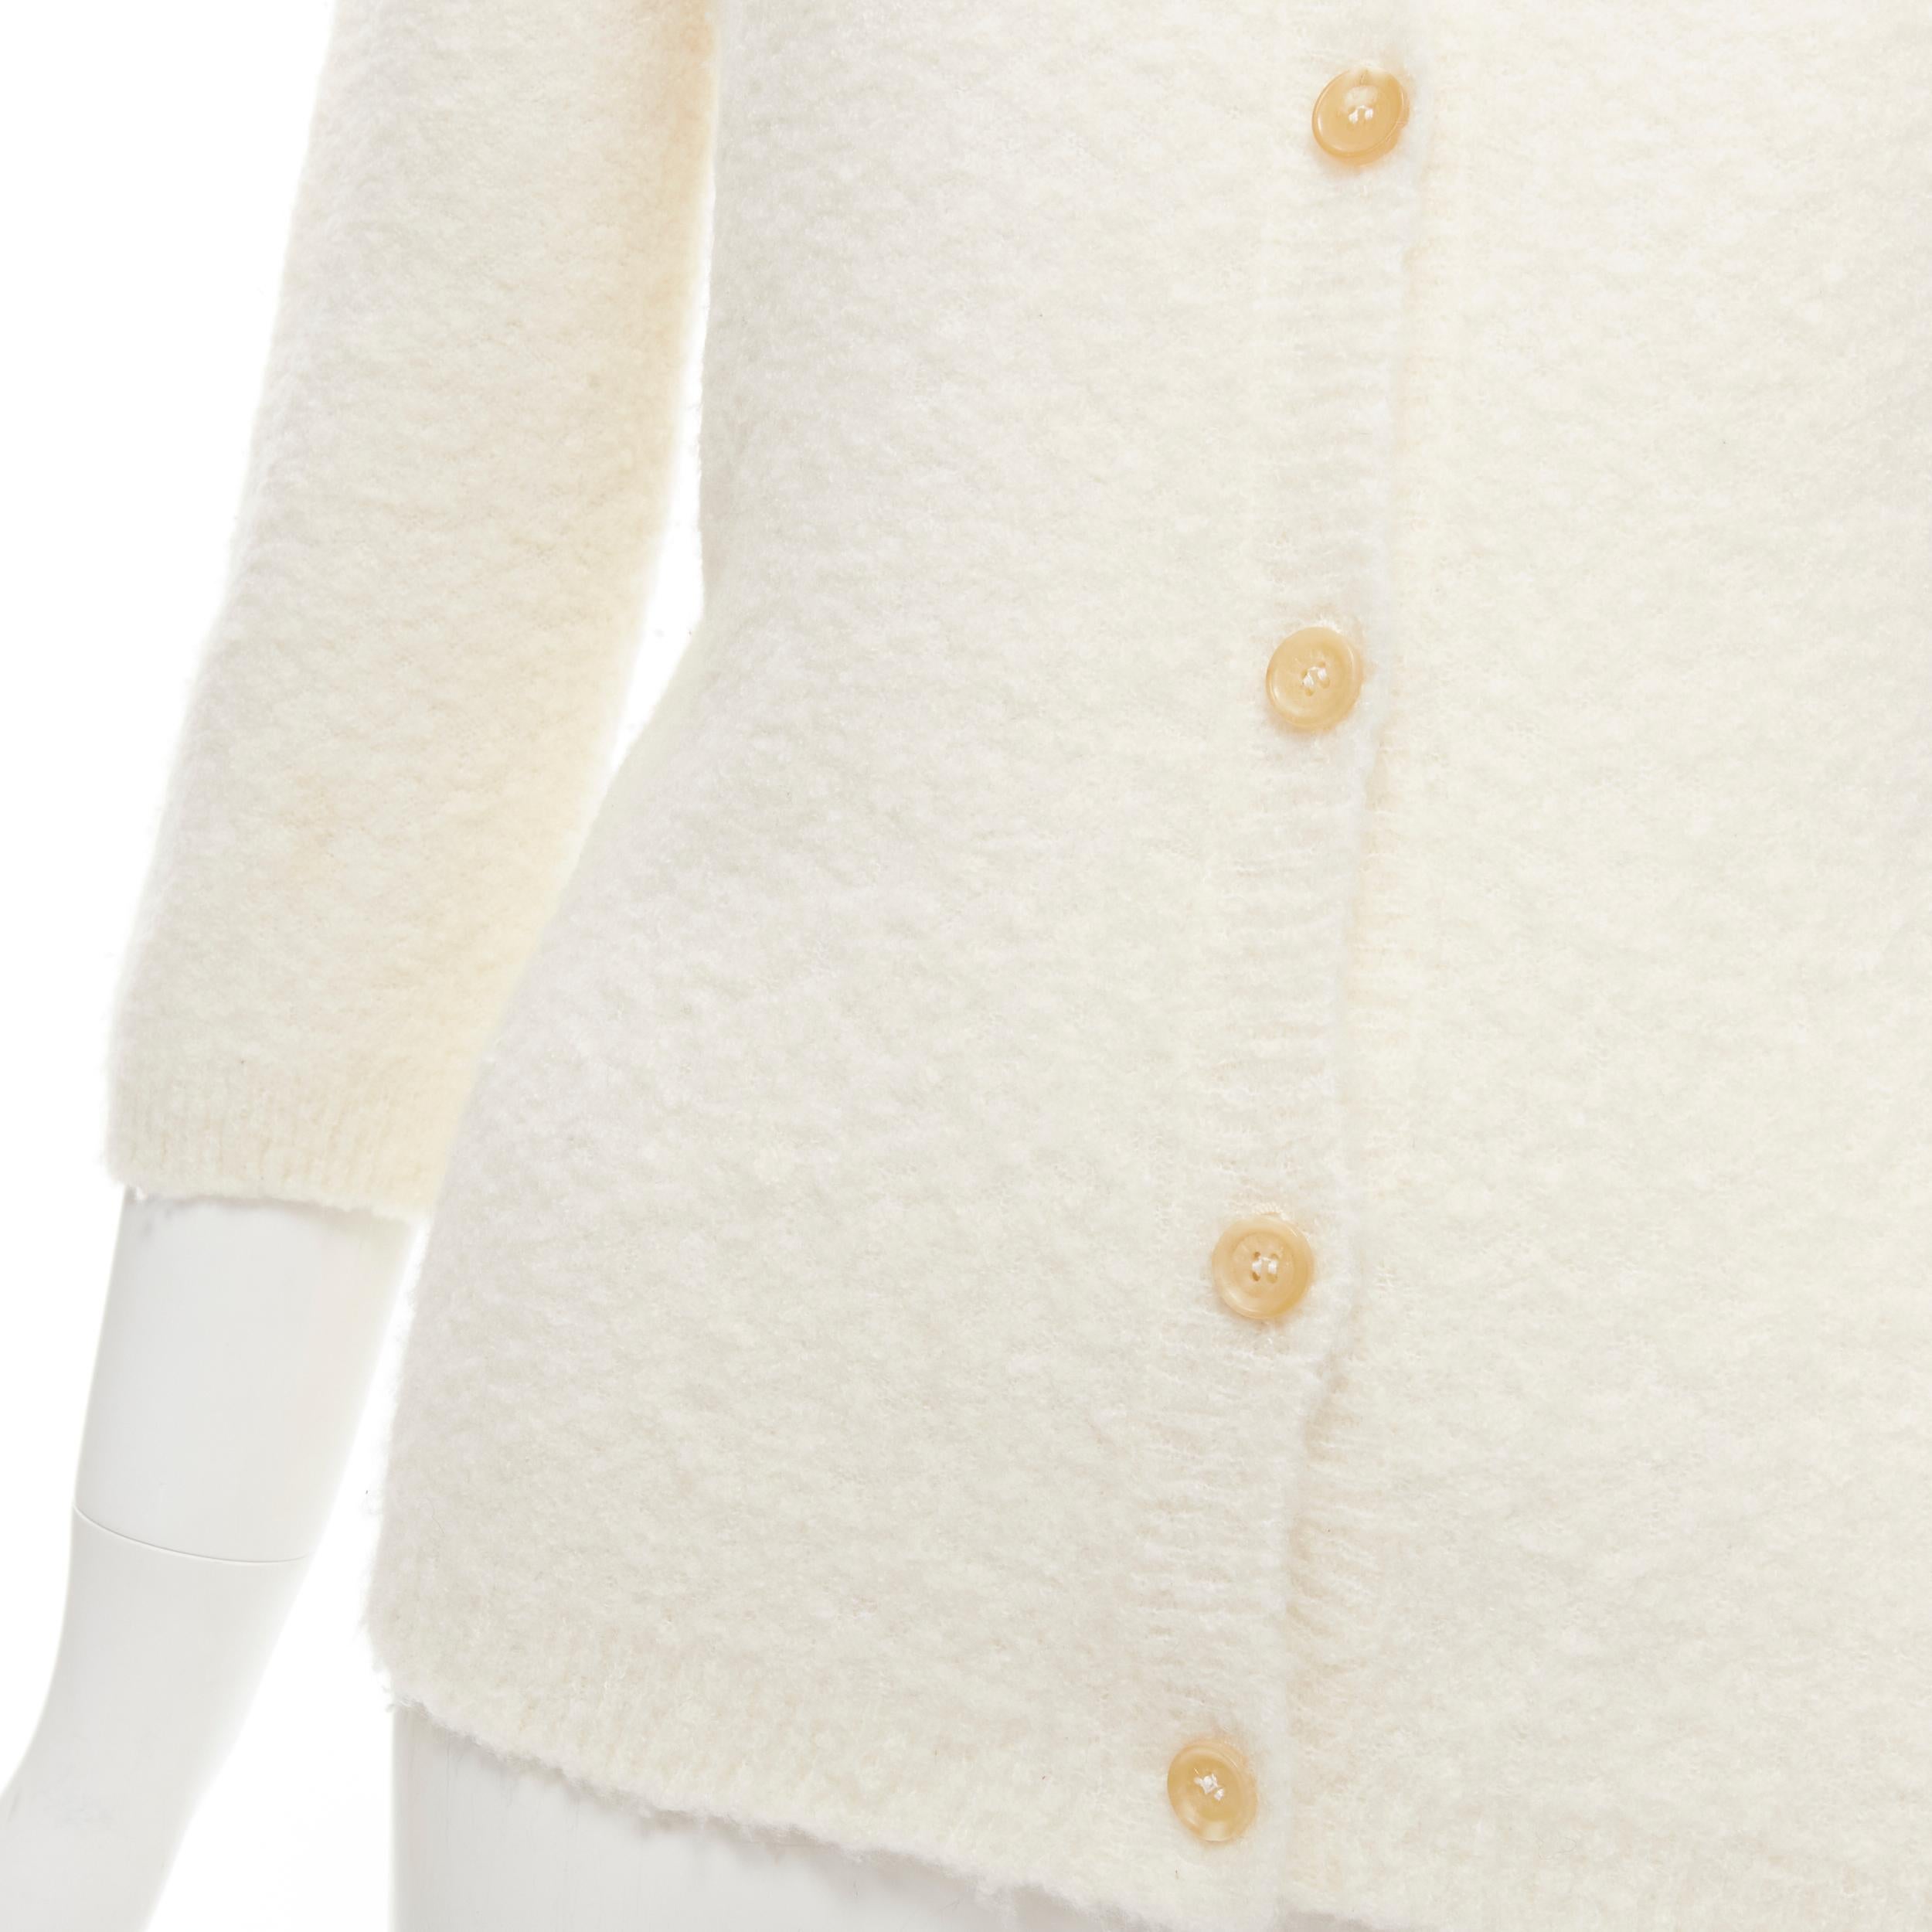 CELINE Vintage off white cashmere blend 3/4 sleeve cardigan sweater L 
Reference: AEMA/A00064 
Brand: Celine 
Material: Cashmere 
Color: Cream 
Pattern: Solid 
Closure: Button 
Extra Detail: Cream buttons. Boucle textured wool upper. 
Estimated